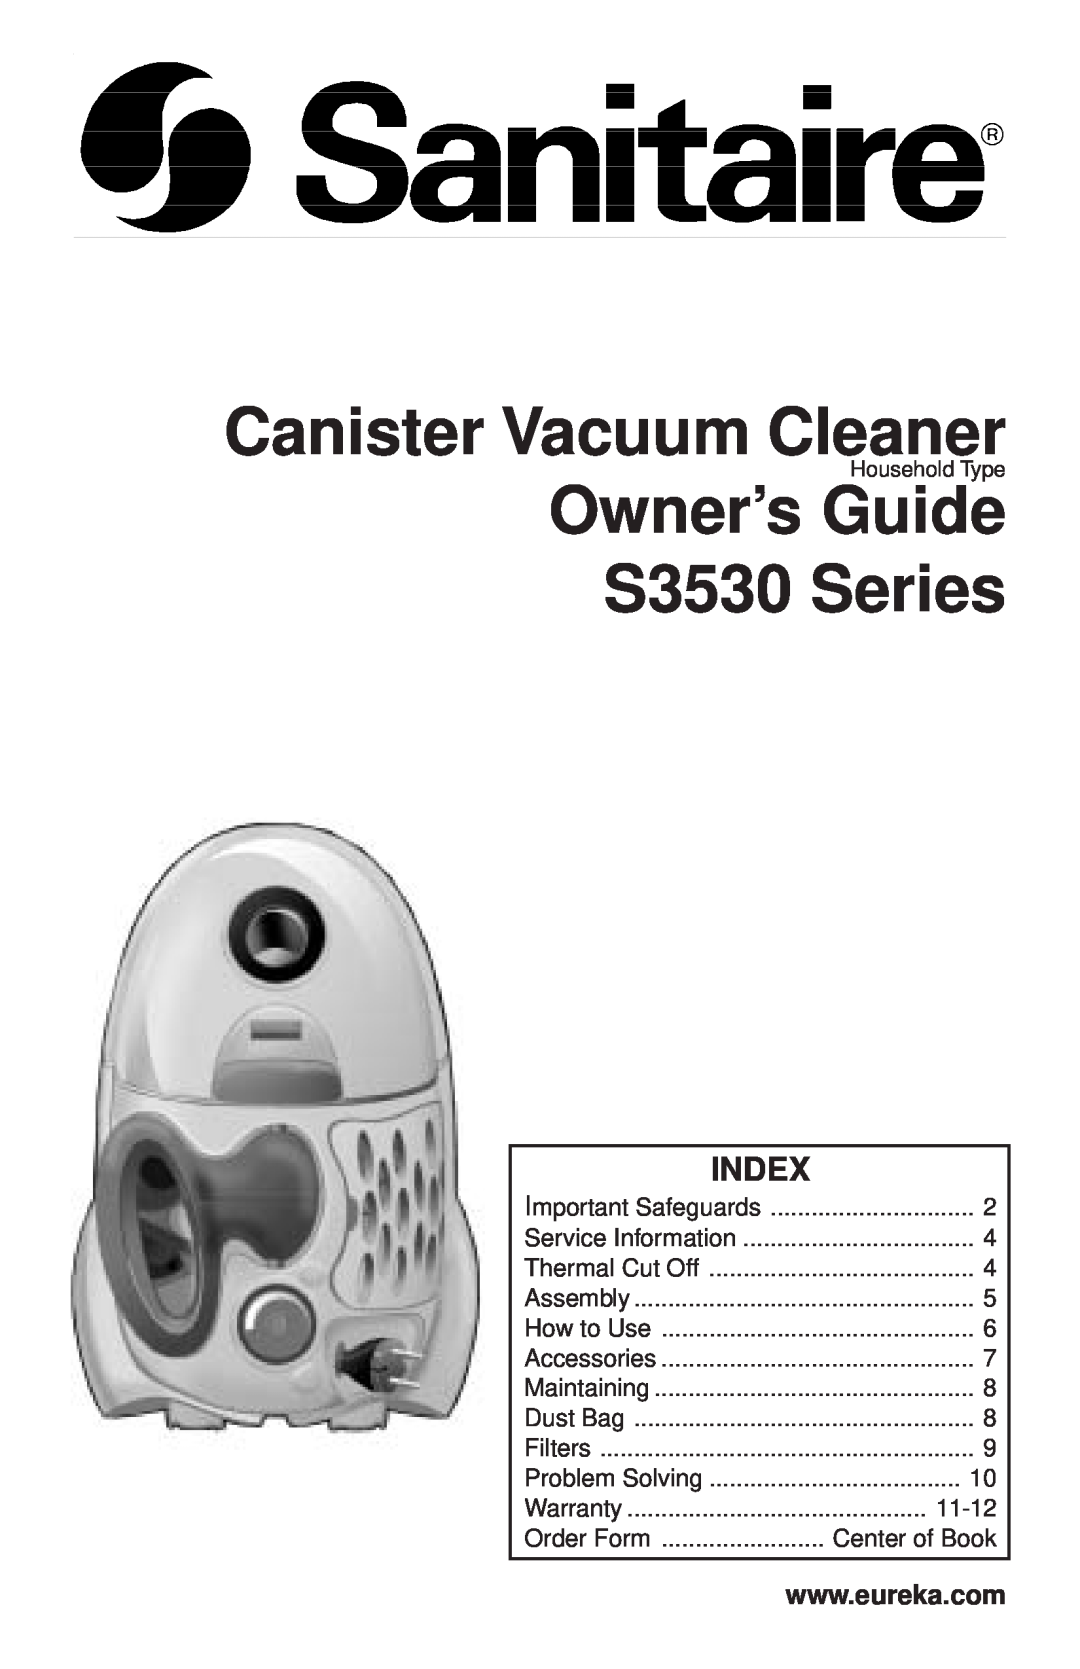 Sanitaire S3530 SERIES warranty Index, Canister Vacuum Cleaner, Owner’s Guide S3530 Series 